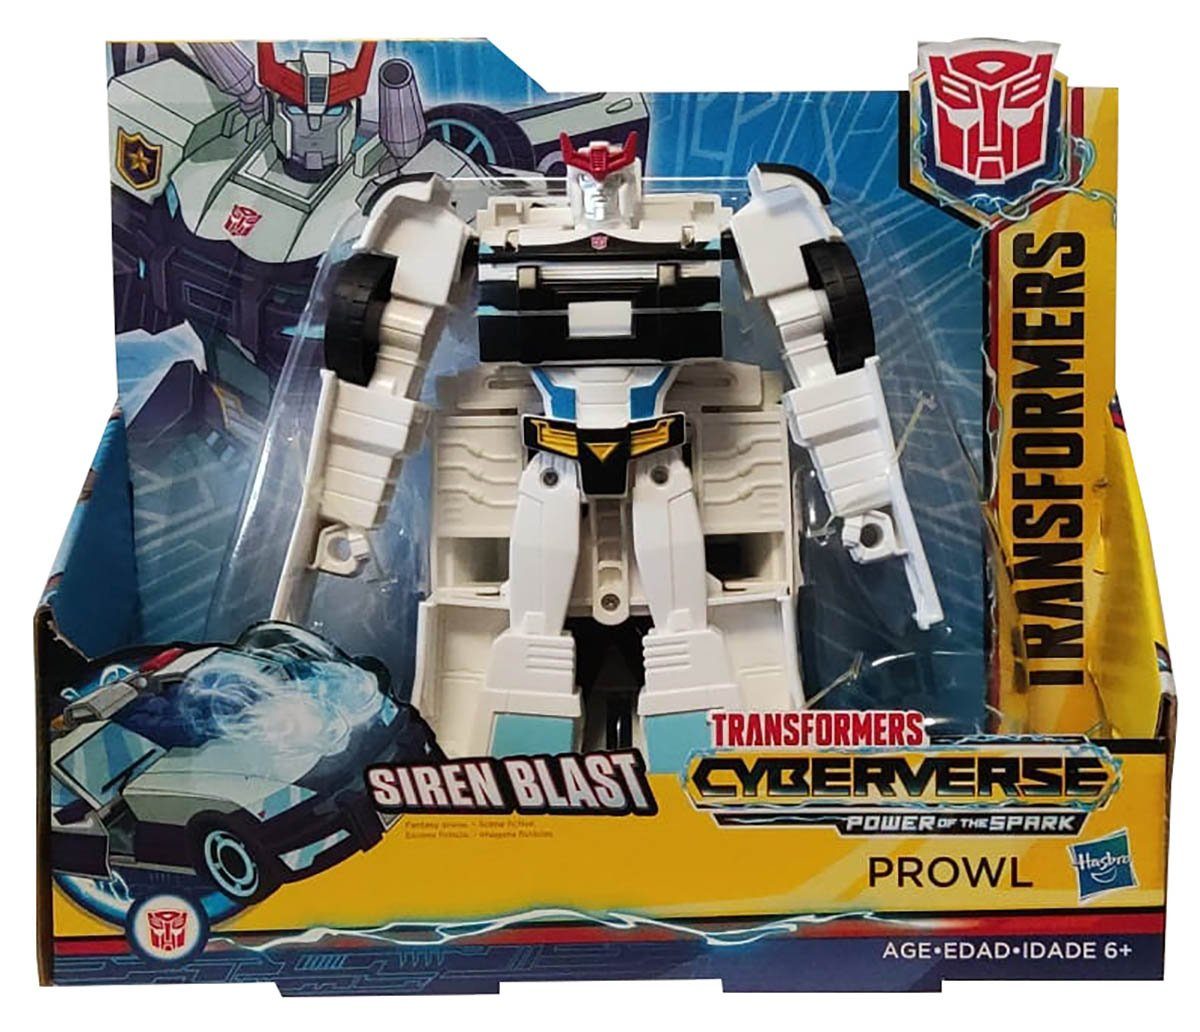 Actionfigur of Transformers Power Cyberverse the E4802 Hasbro Transformers